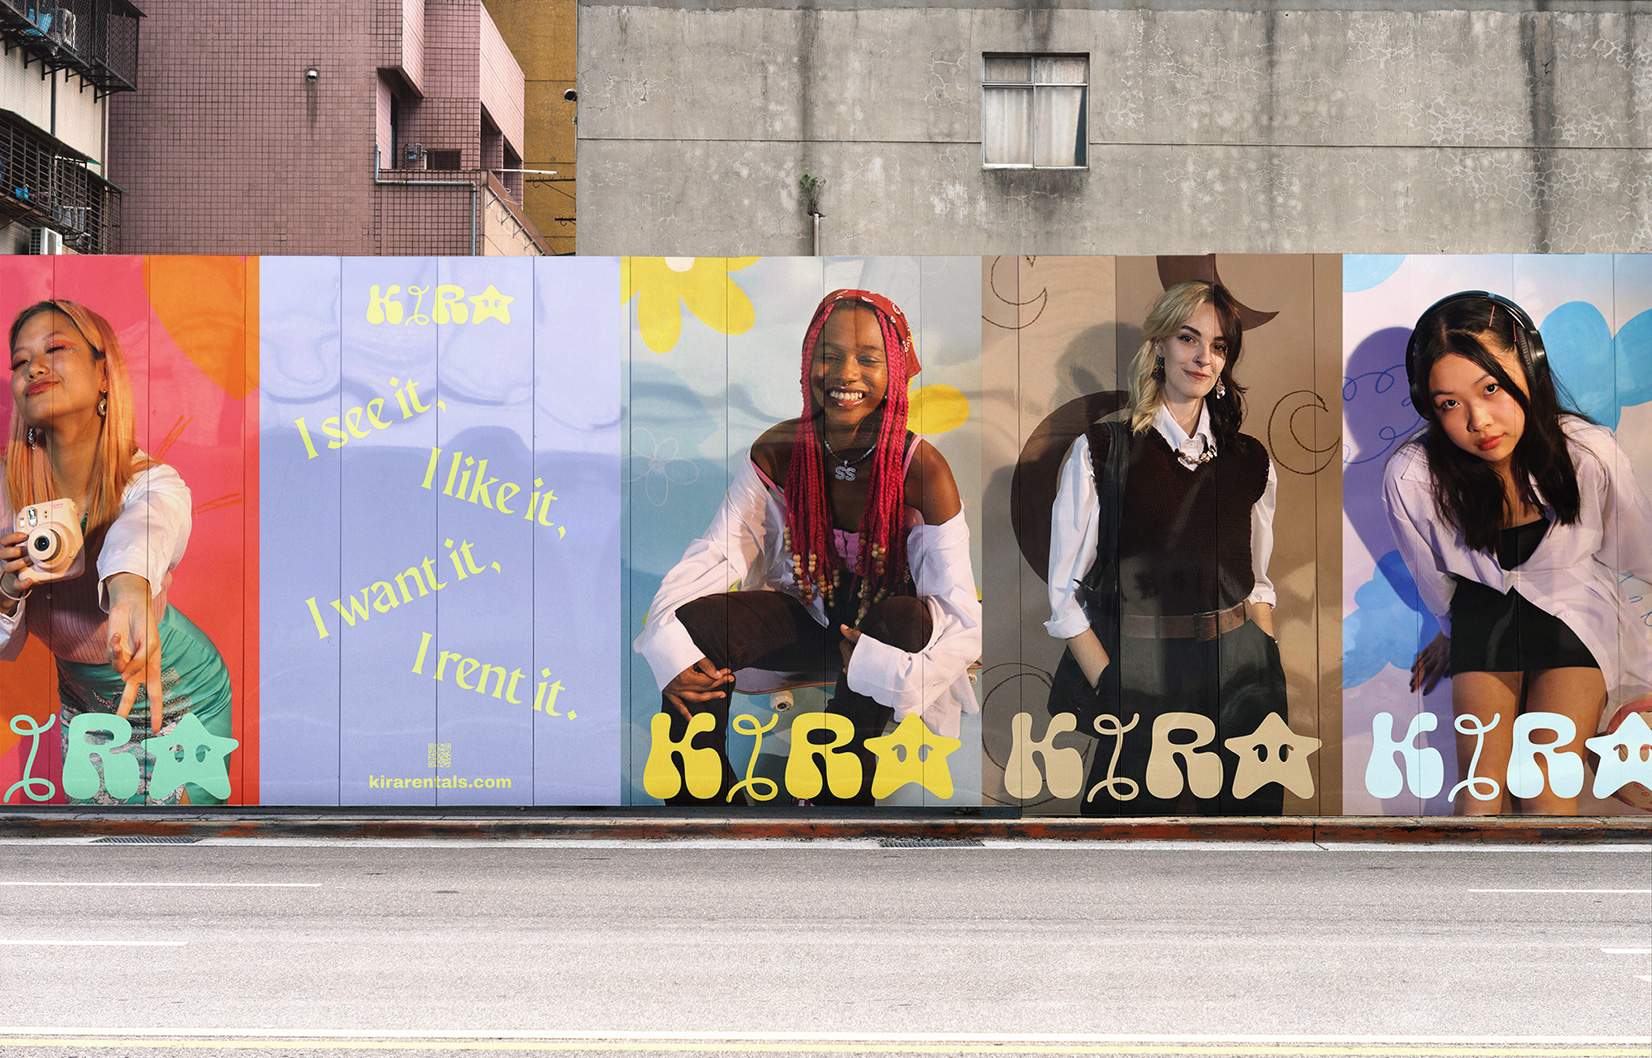 Fence construction billboard fashion posters.